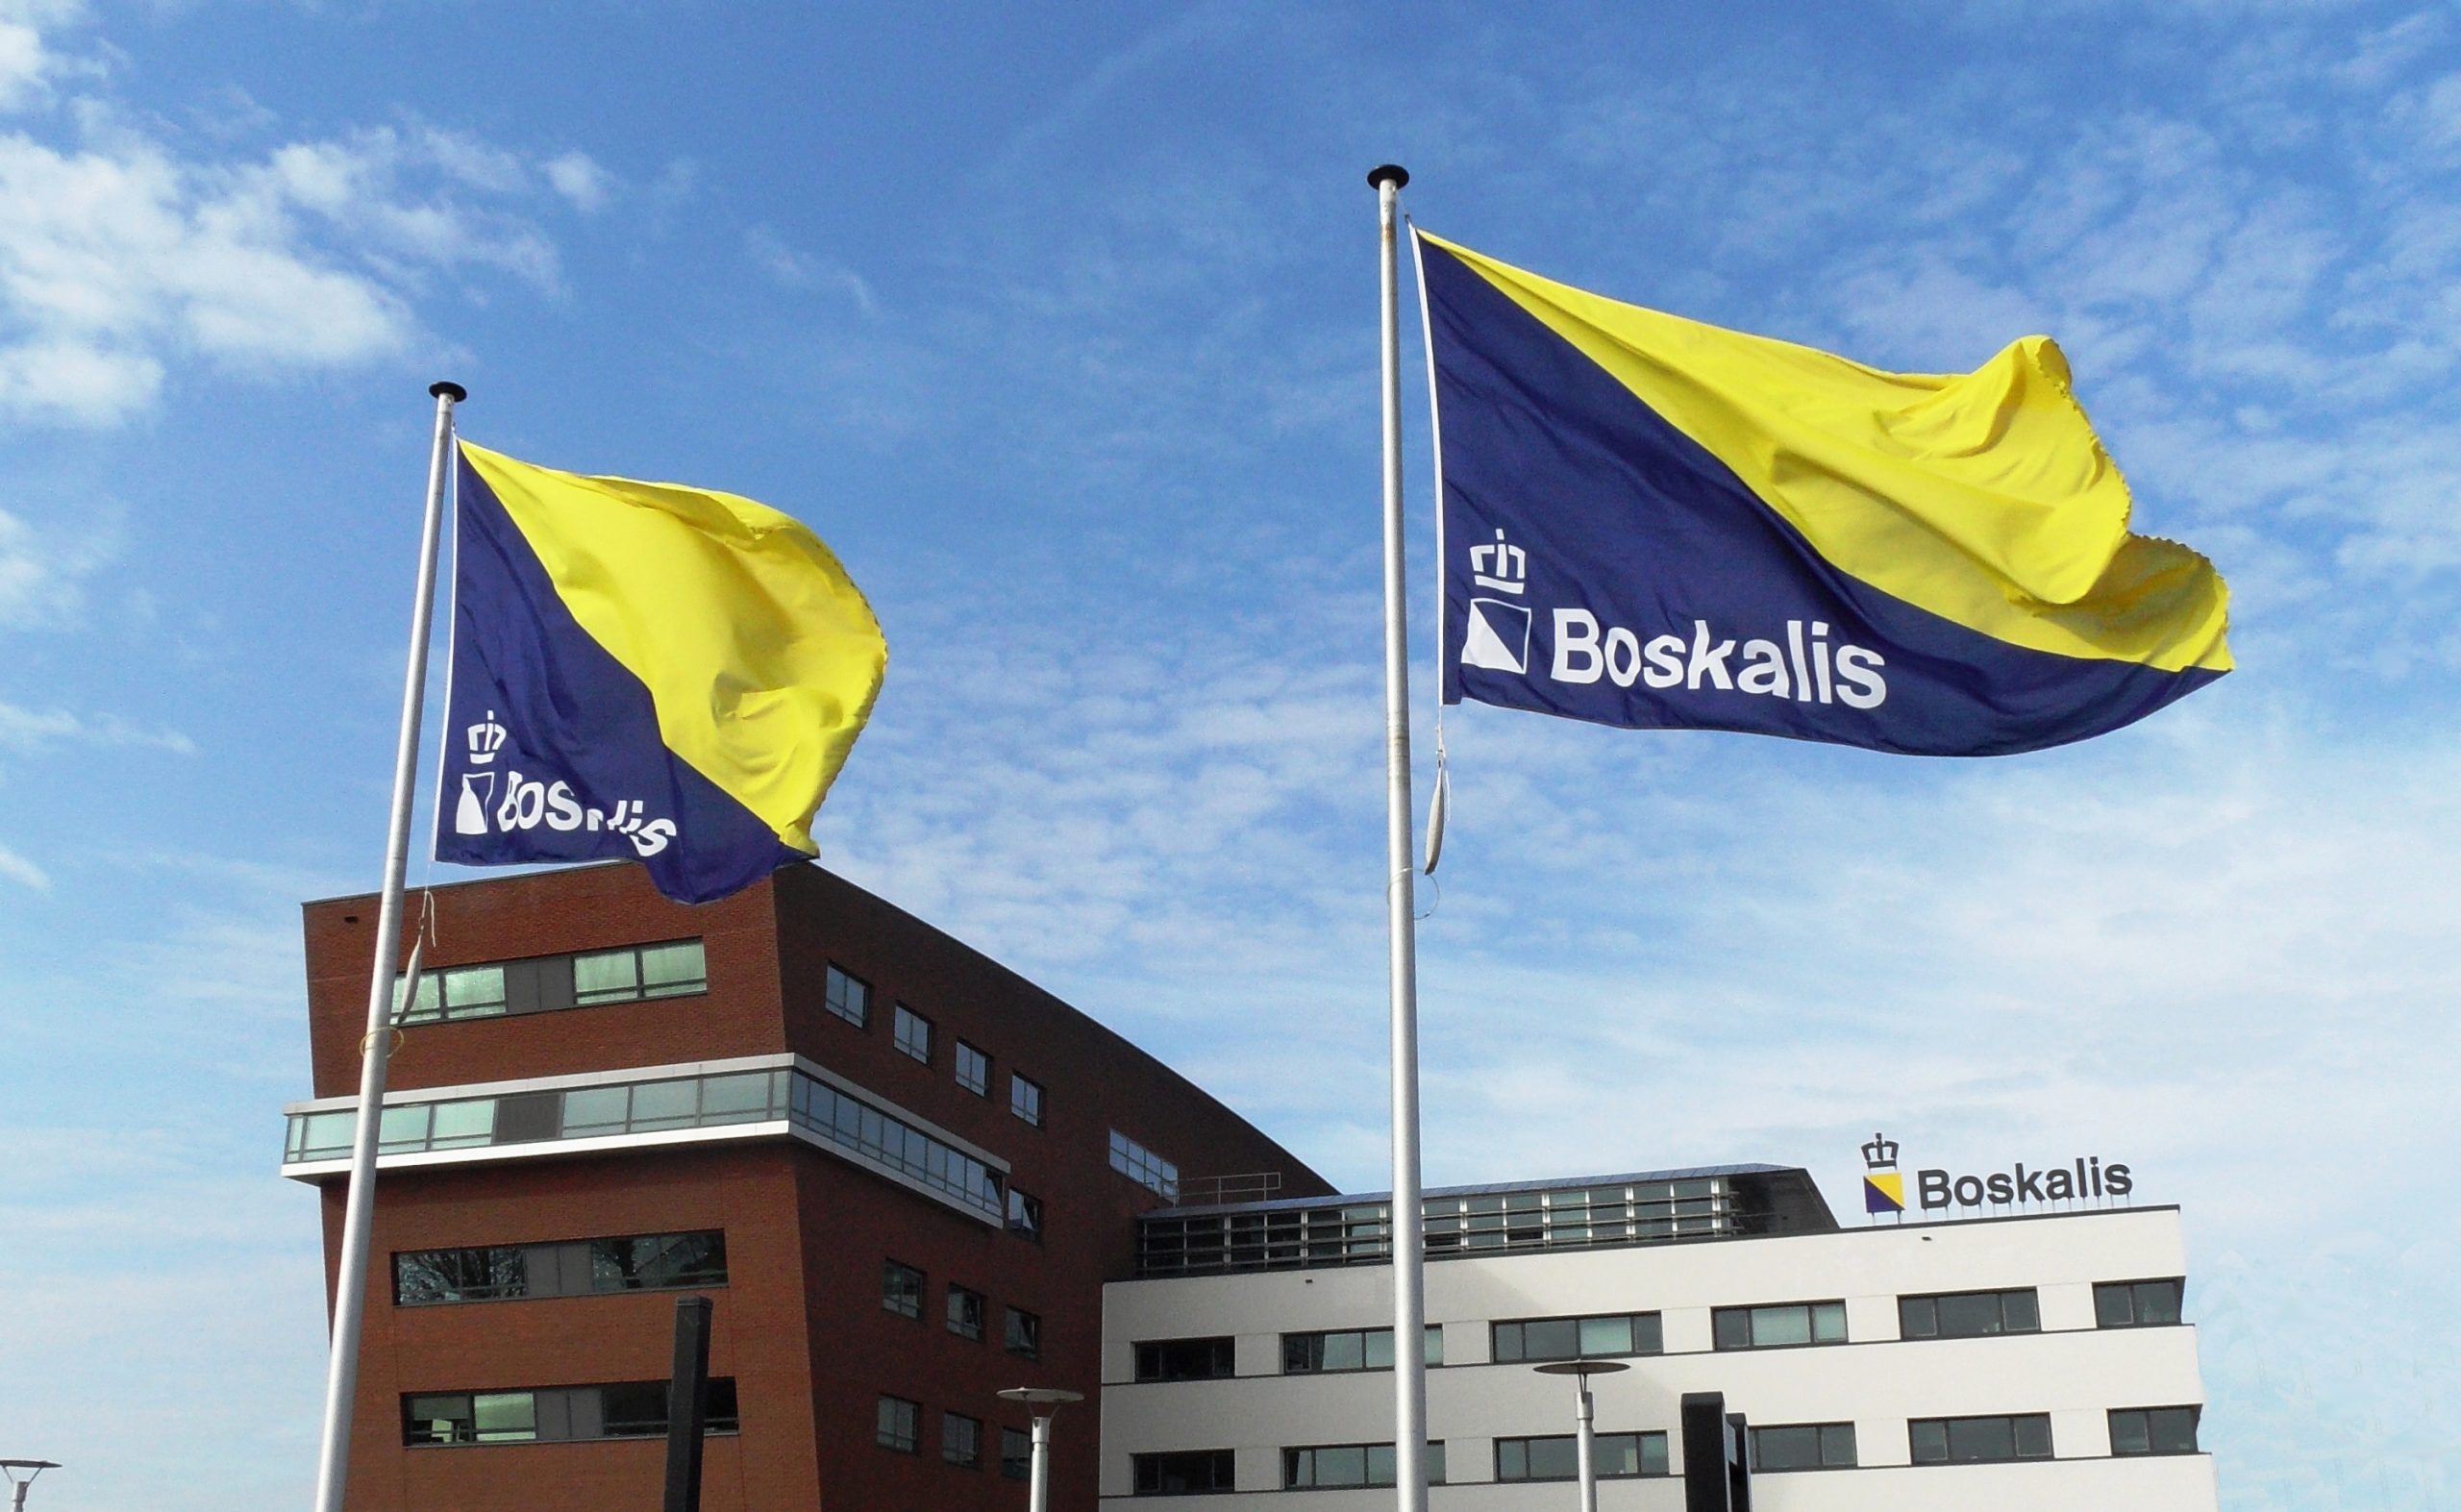 Boskalis Buys Rever Offshore’s Subsea Business